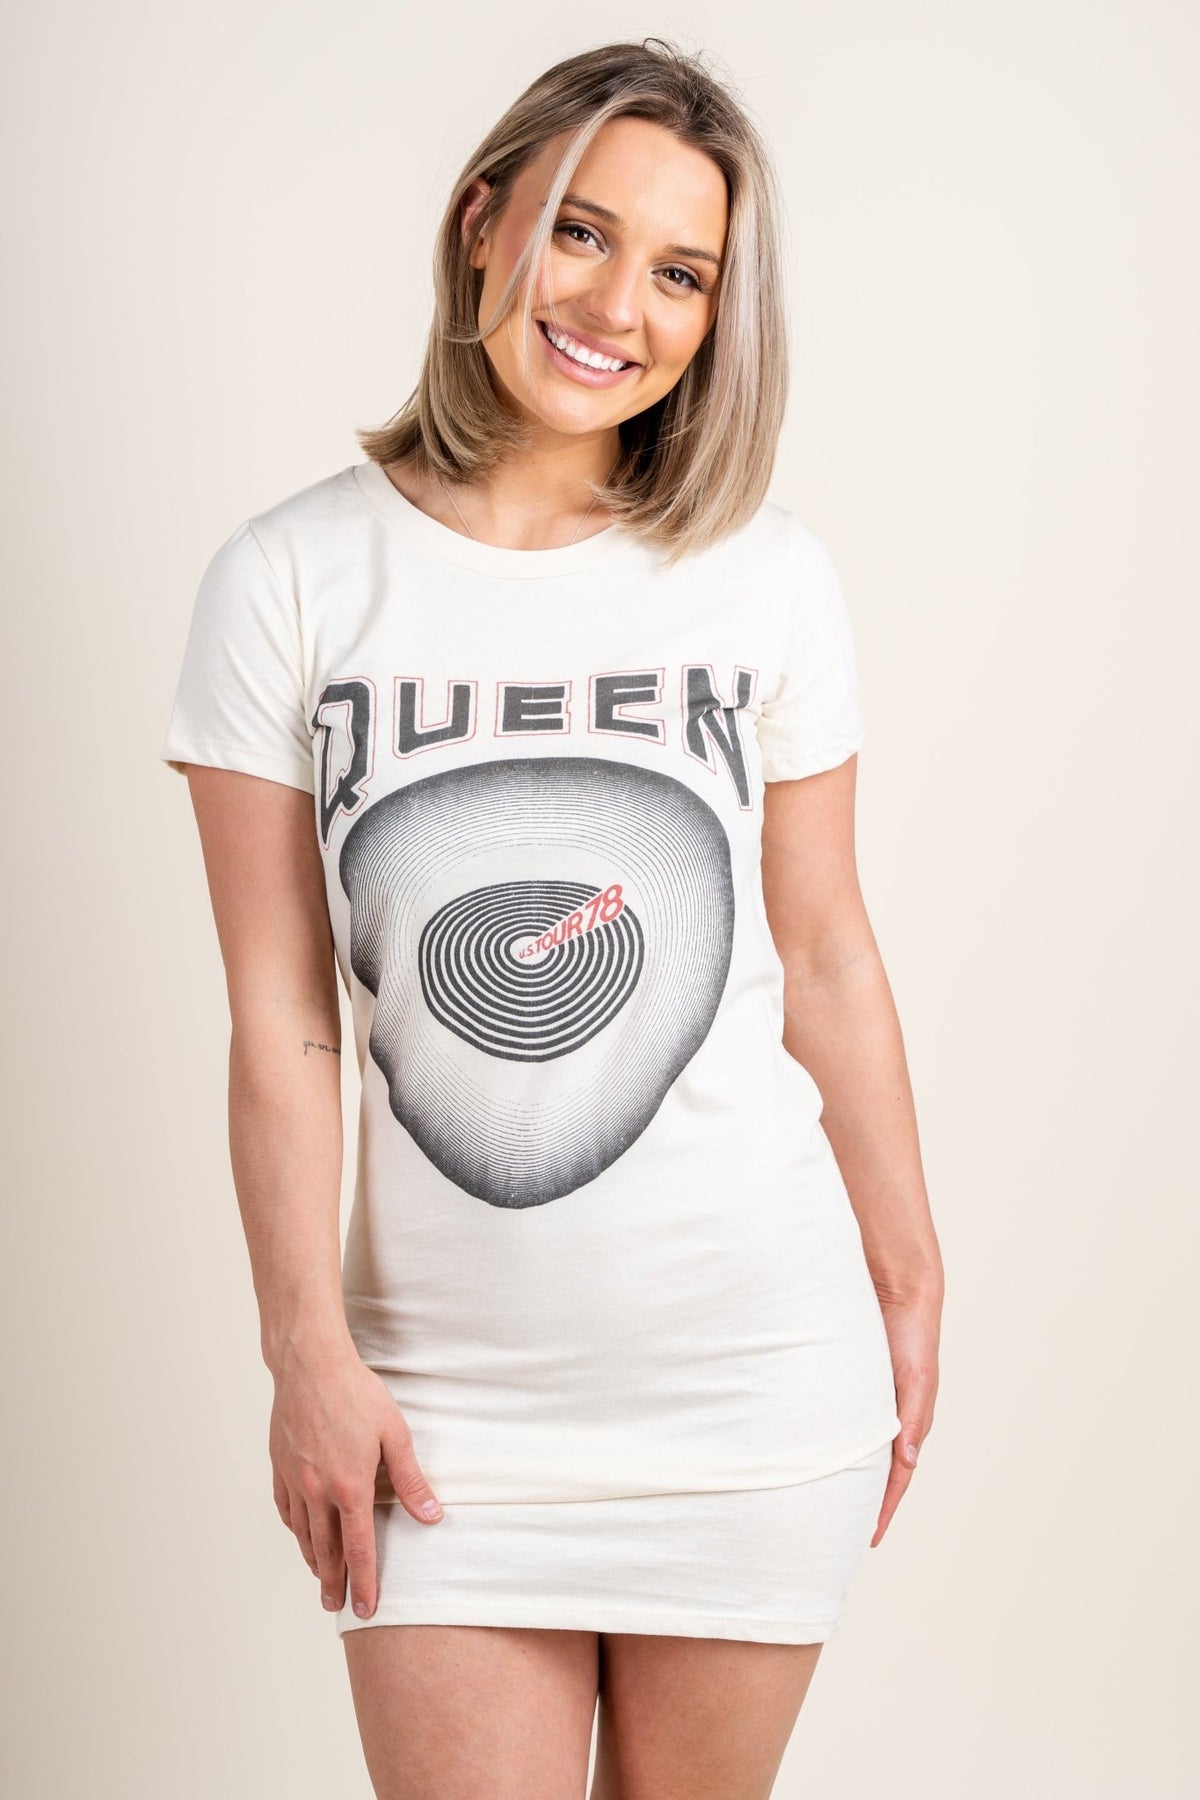 Queen Jazz t-shirt dress stone - Trendy Band T-Shirts and Sweatshirts at Lush Fashion Lounge Boutique in Oklahoma City